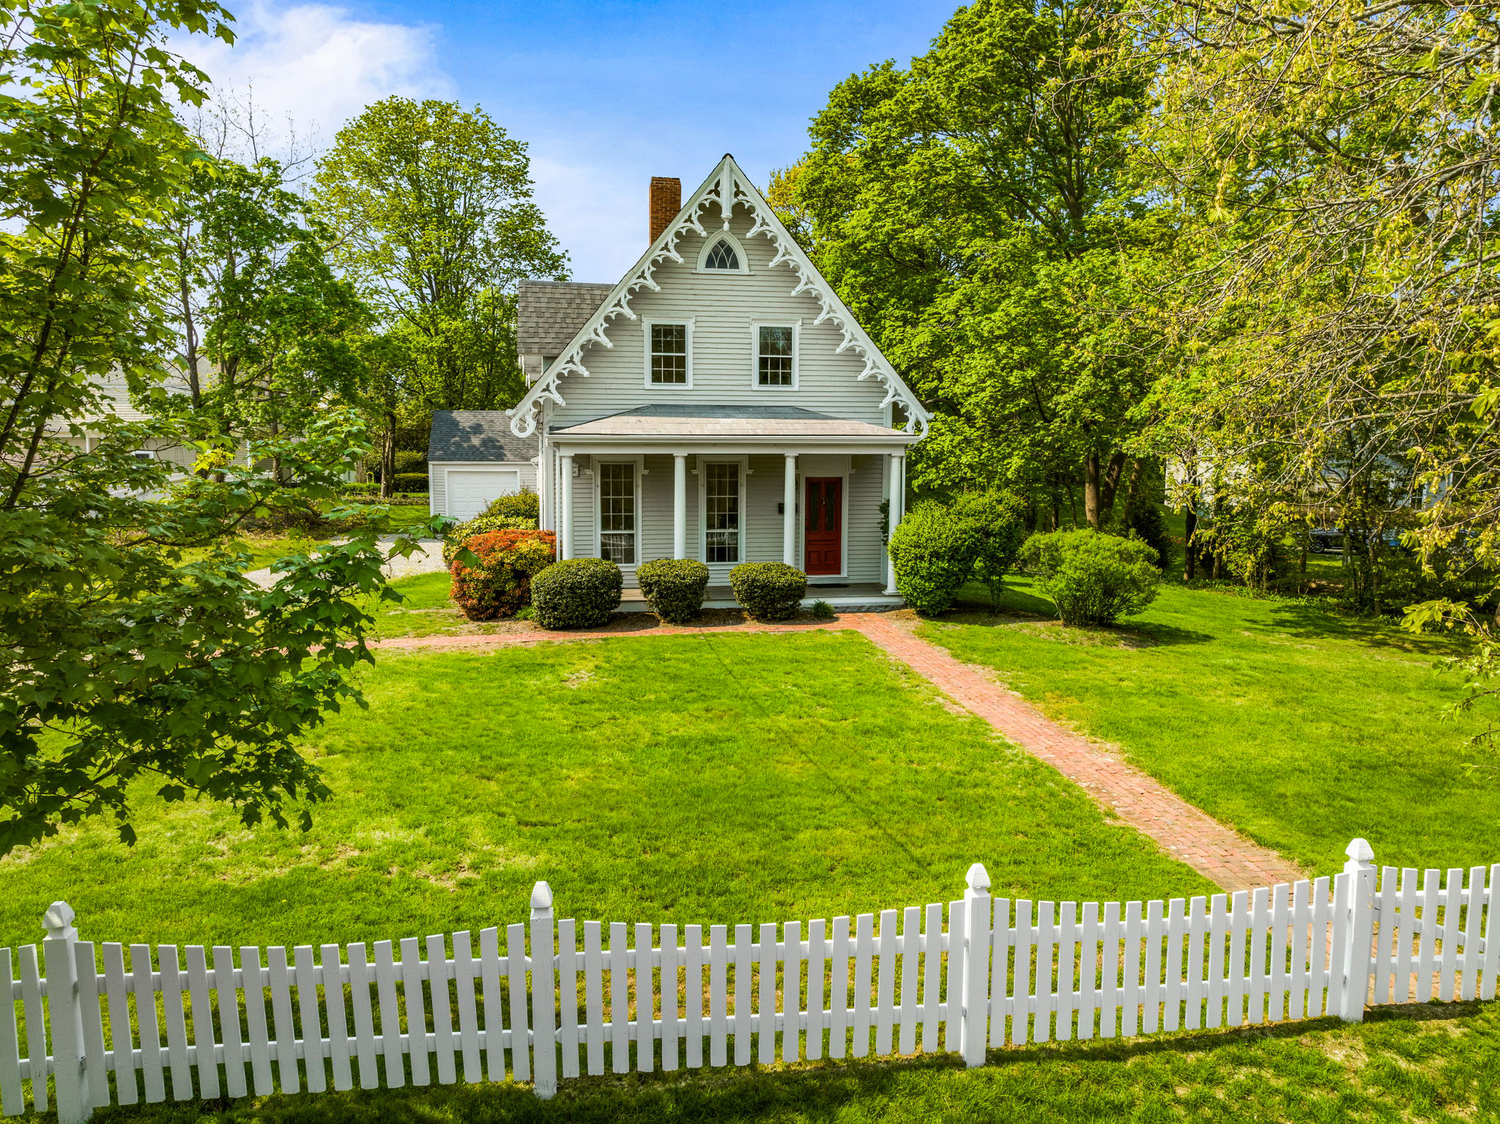 2337_663_property_front-with-green-grass-cotttage-20230511112934.jpeg